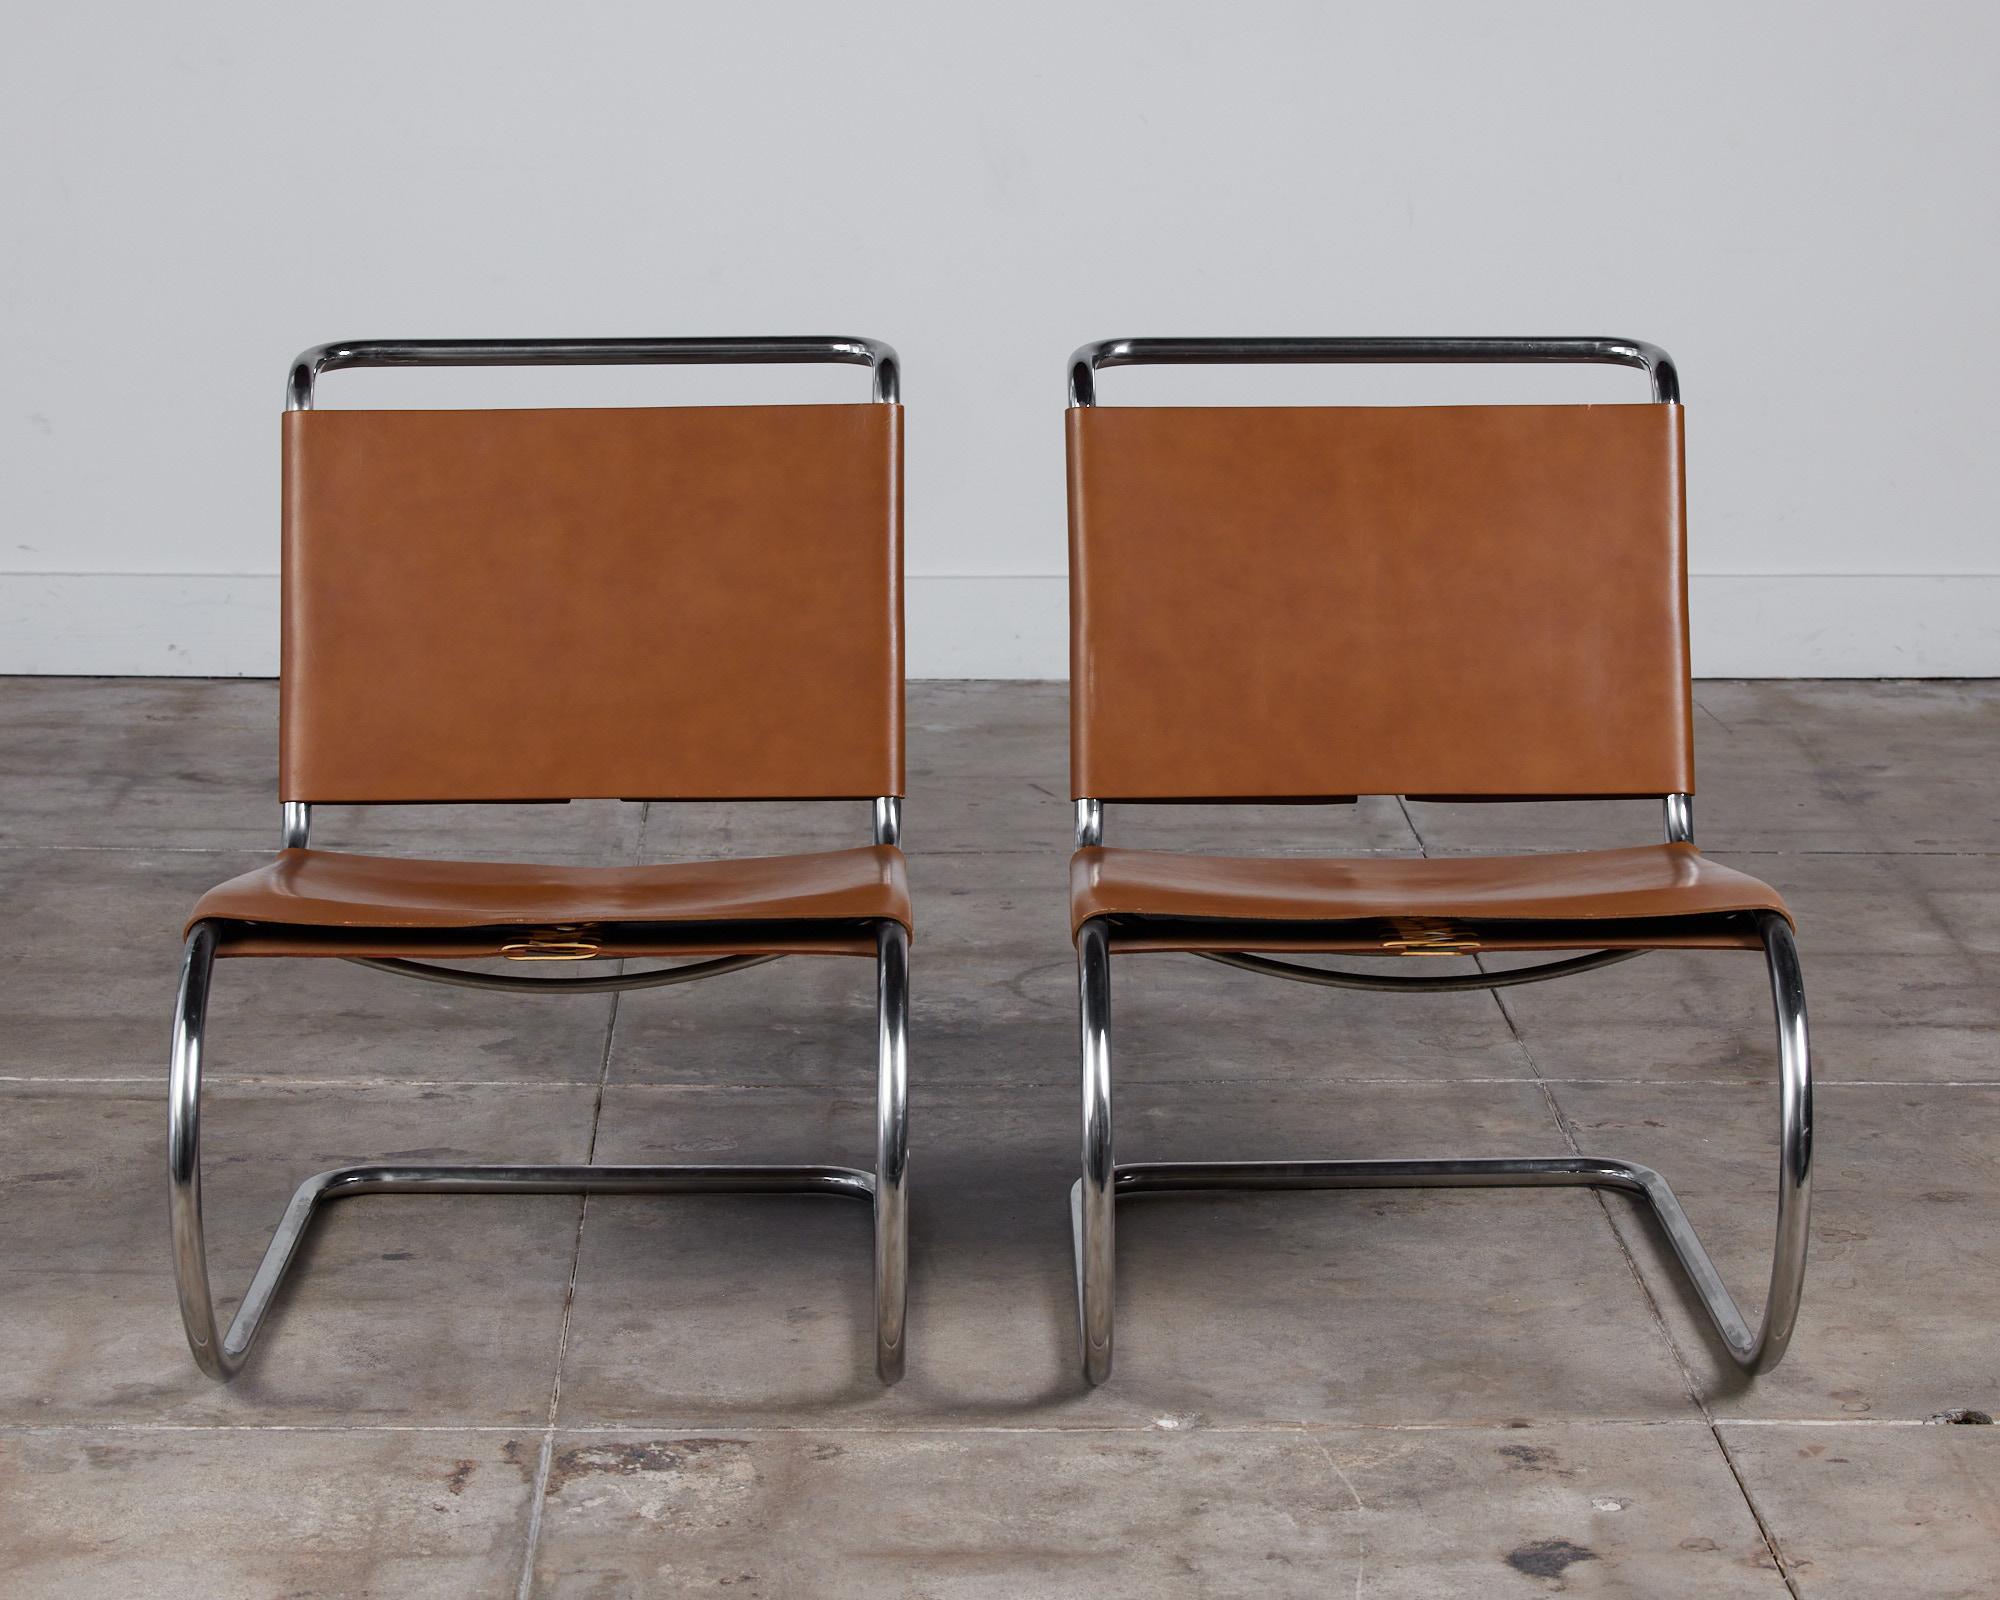 American Pair of Mies van der Rohe Leather Lounge Chairs for Knoll